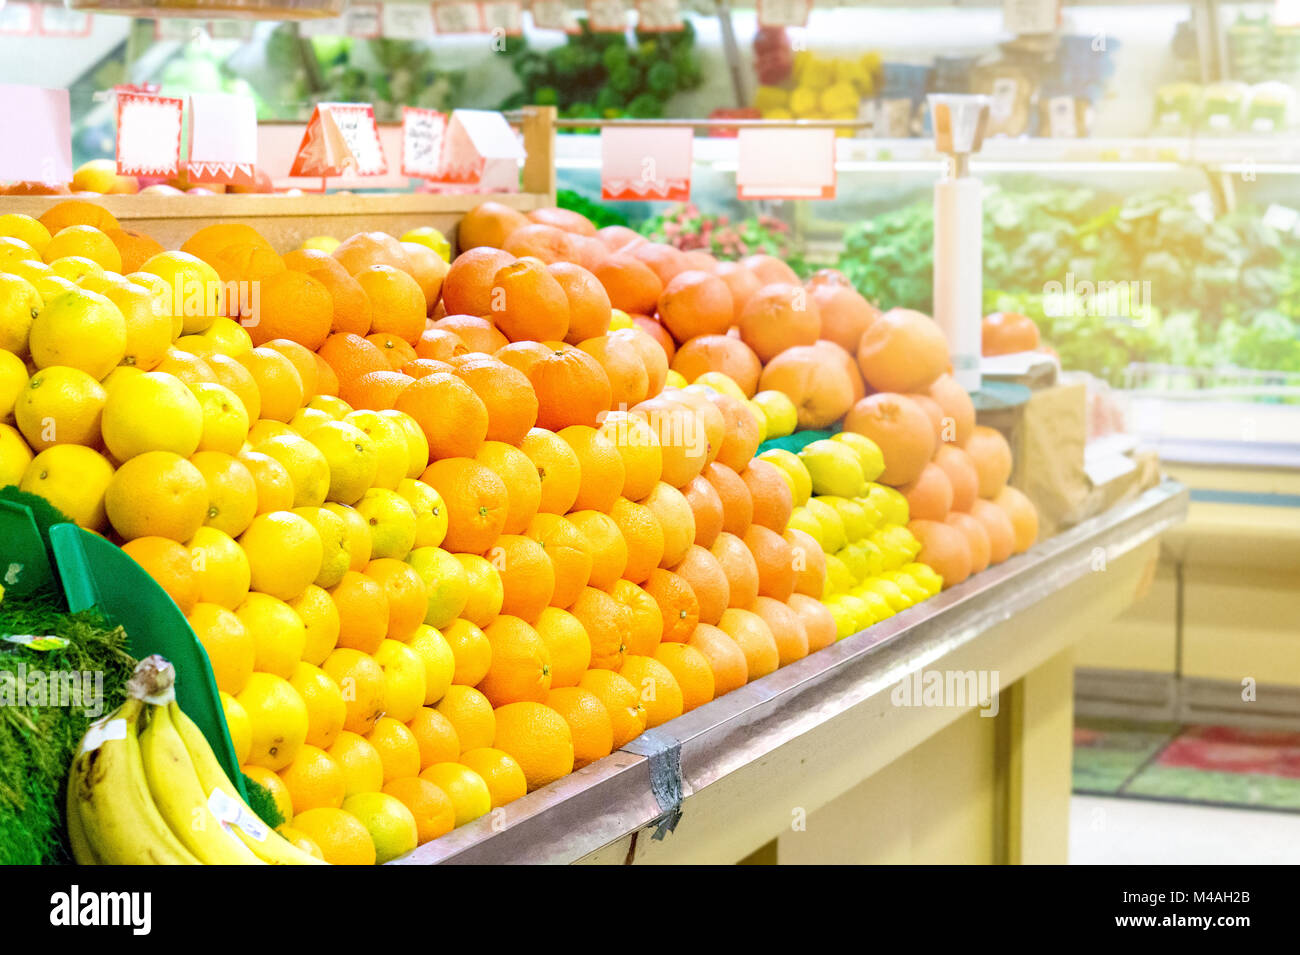 Fruits in grocery store. Oranges and mandarins in supermarket. Stock Photo